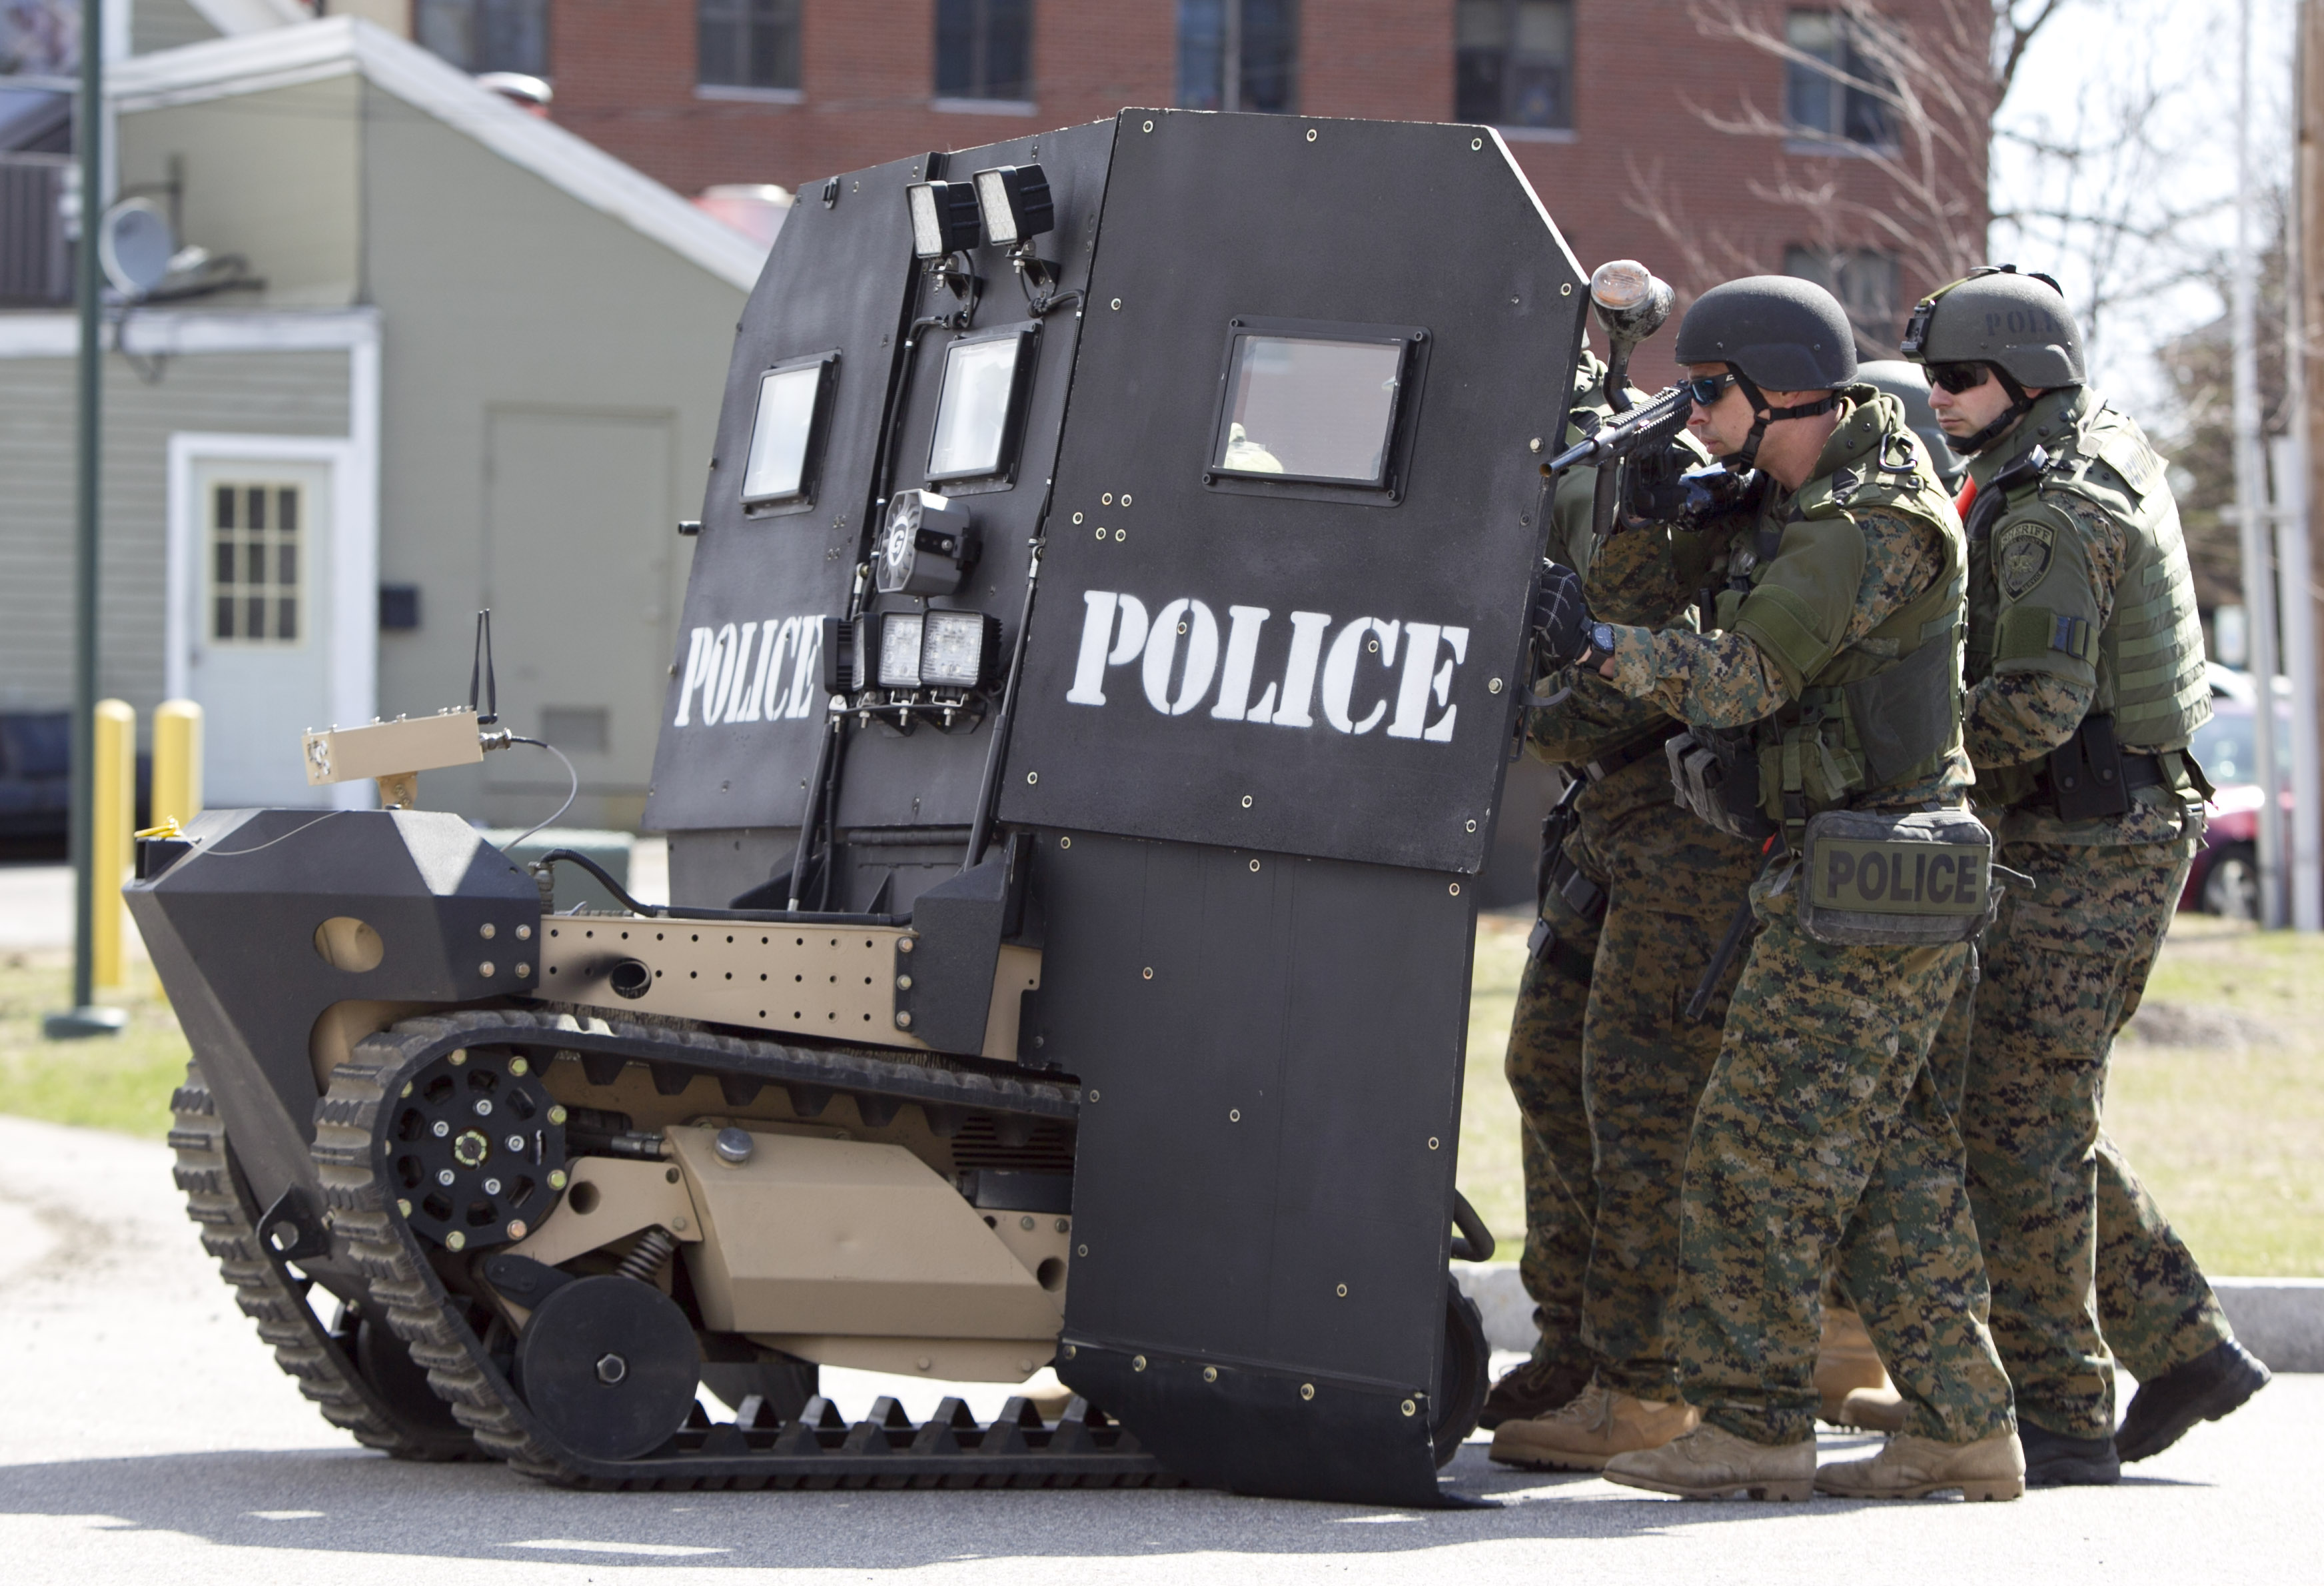 Police militarization. The police are becoming a military with tanks and all. To protect and serve?